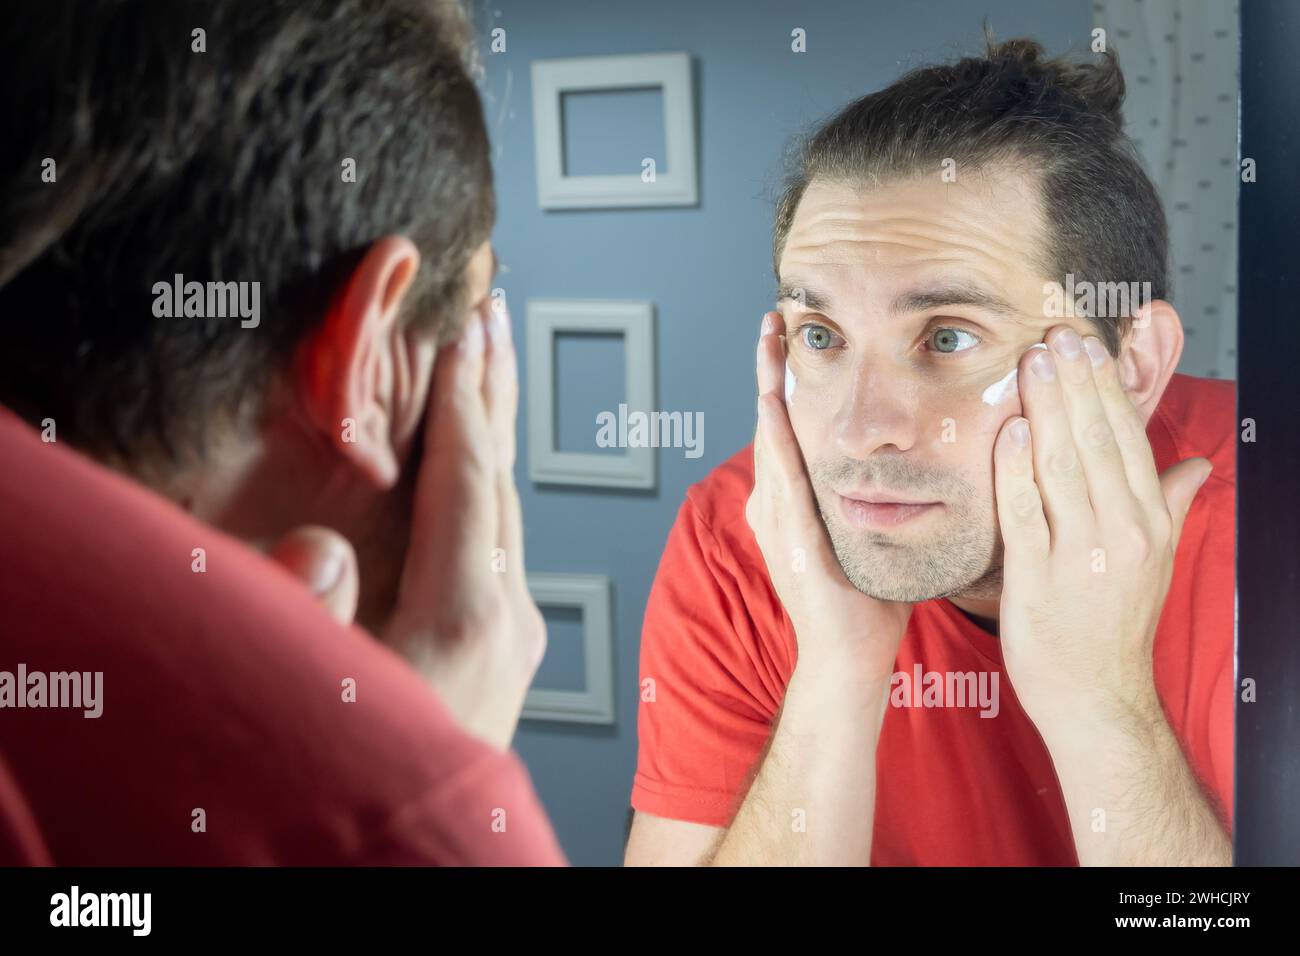 Skin care man. Man applies cream to his face in front of the mirror. Daily skin care for a man. Natural photo at home. Stock Photo